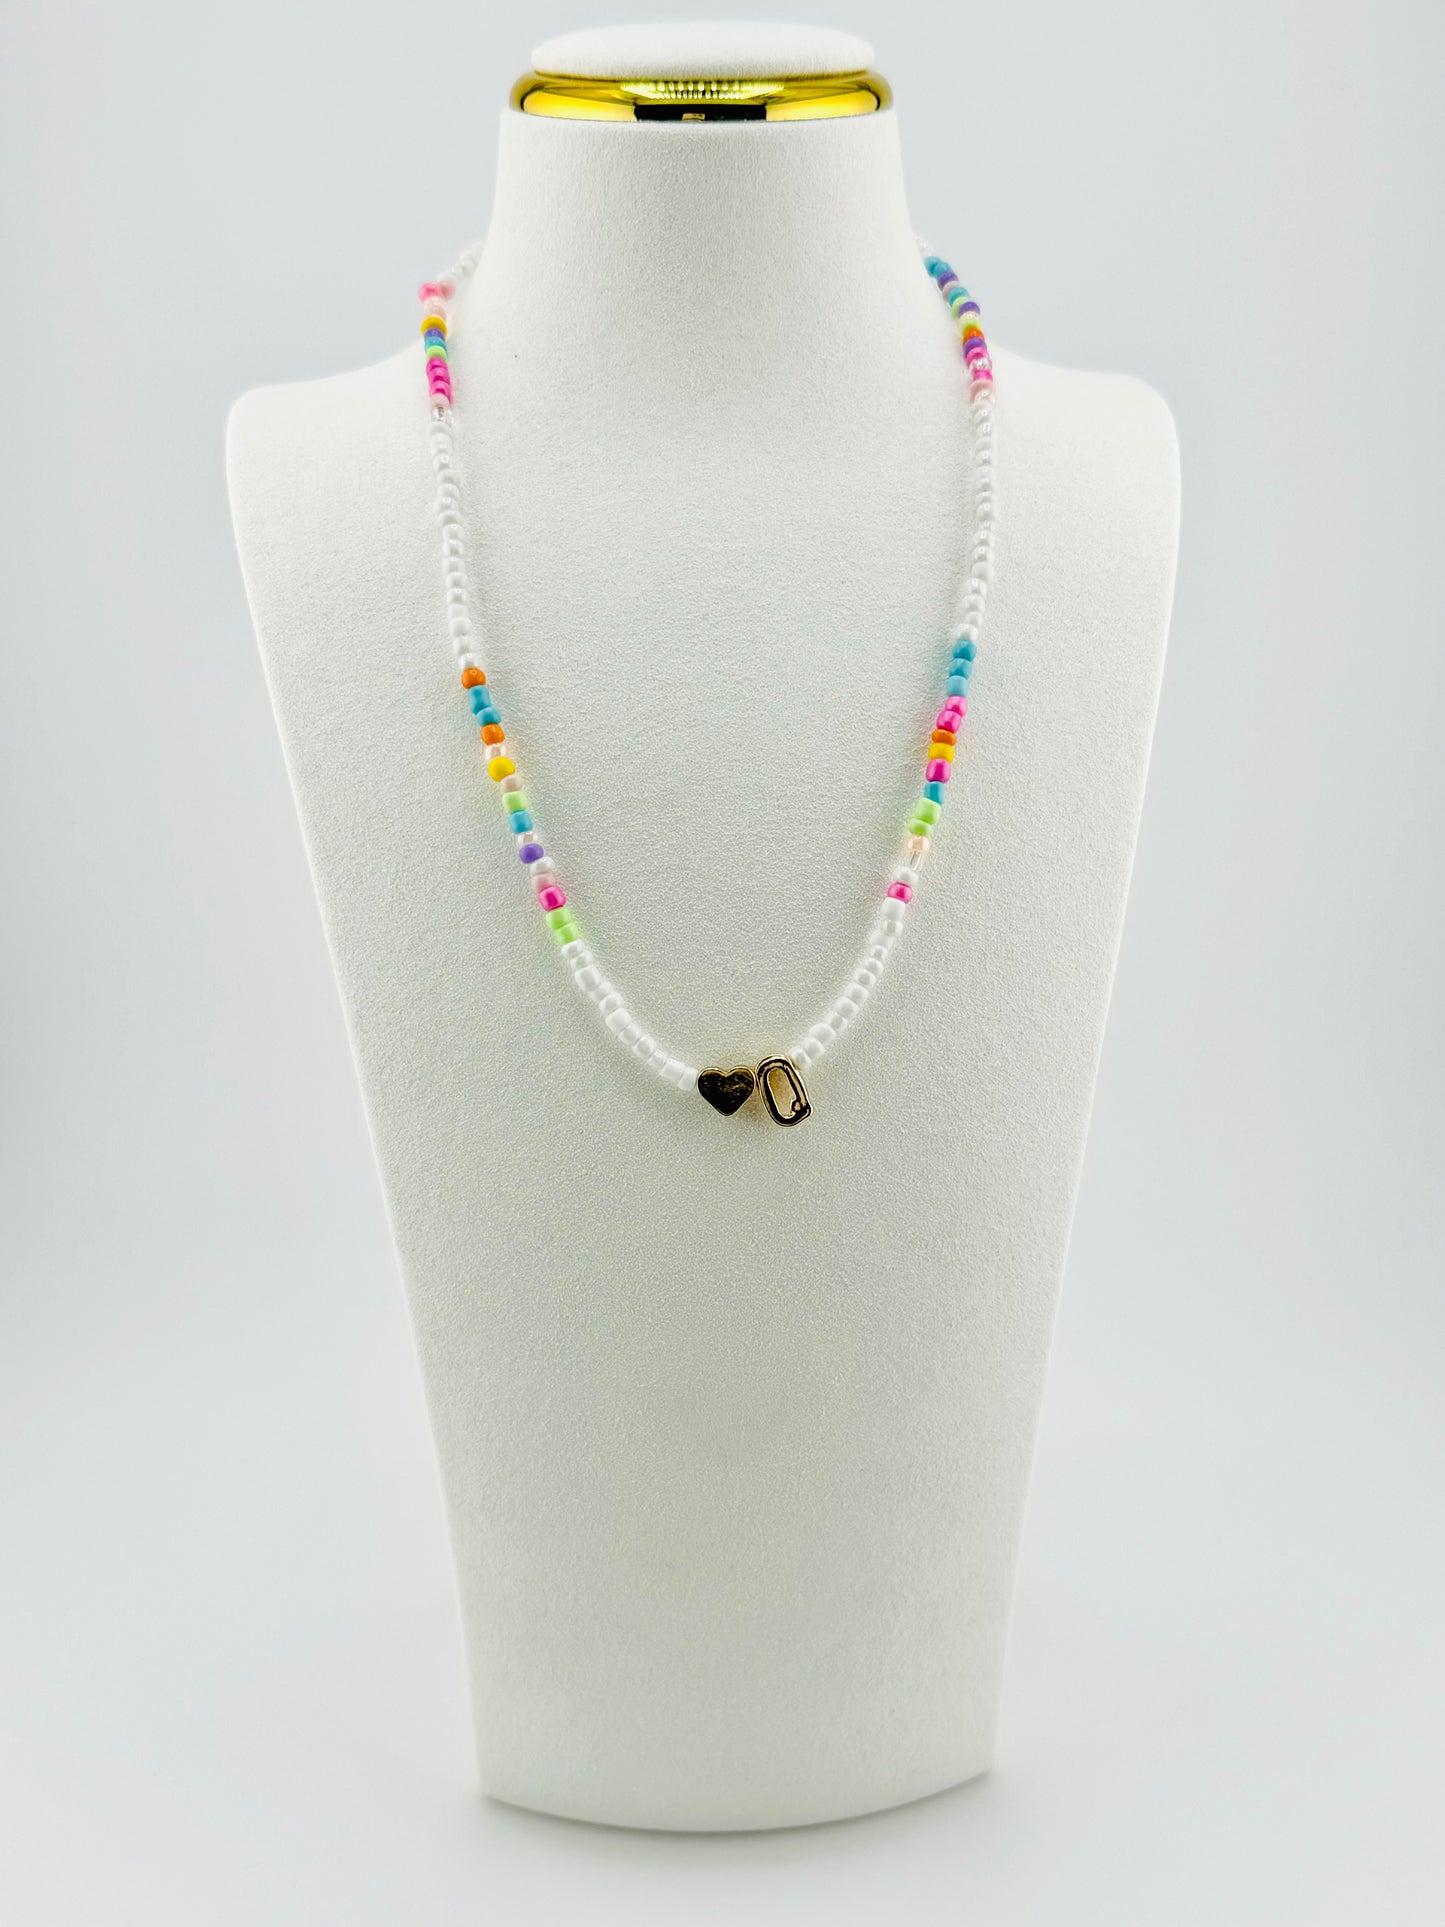 Q beaded Initial necklace in white and pastel colors